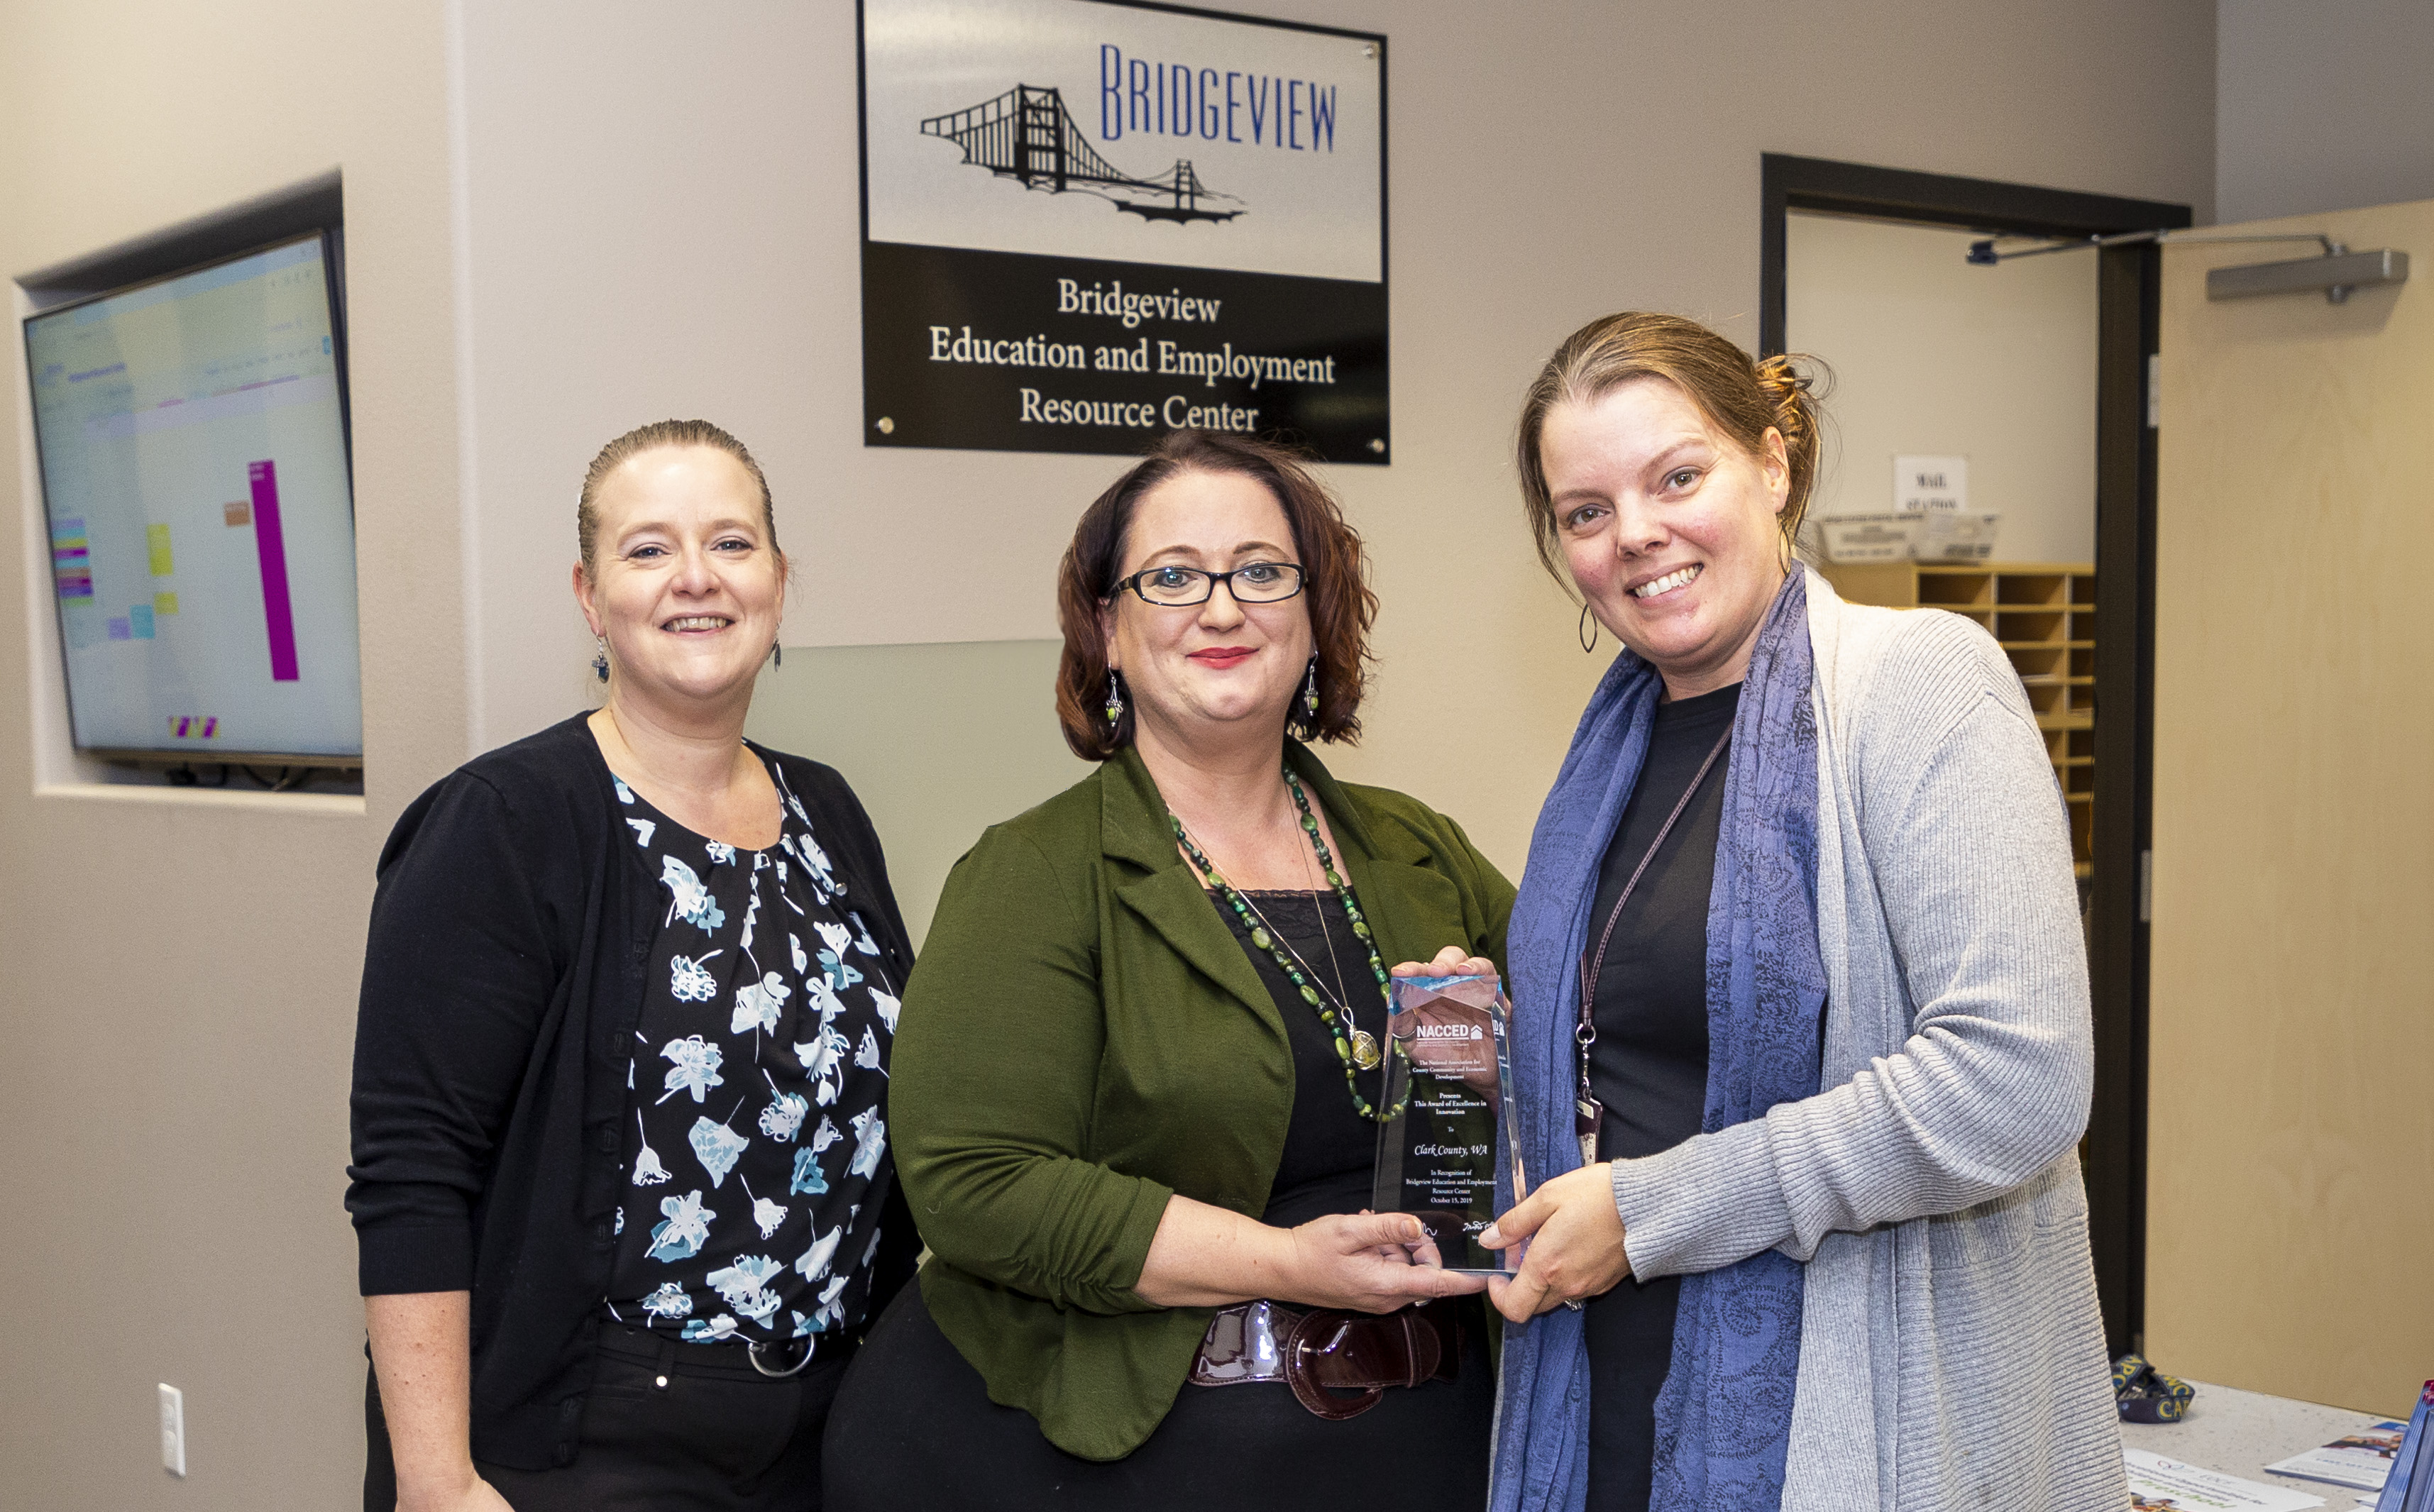 The National Association for Community and Economic Development (NACCED) recently recognized Bridgeview Resource Center with its Award of Excellence in Innovation. Clark County Community Services Program Coordinators Rebecca Royce (left) and Samantha Whitley (right) present the award to Bridgeview Executive Director Angie Sytsma (center).